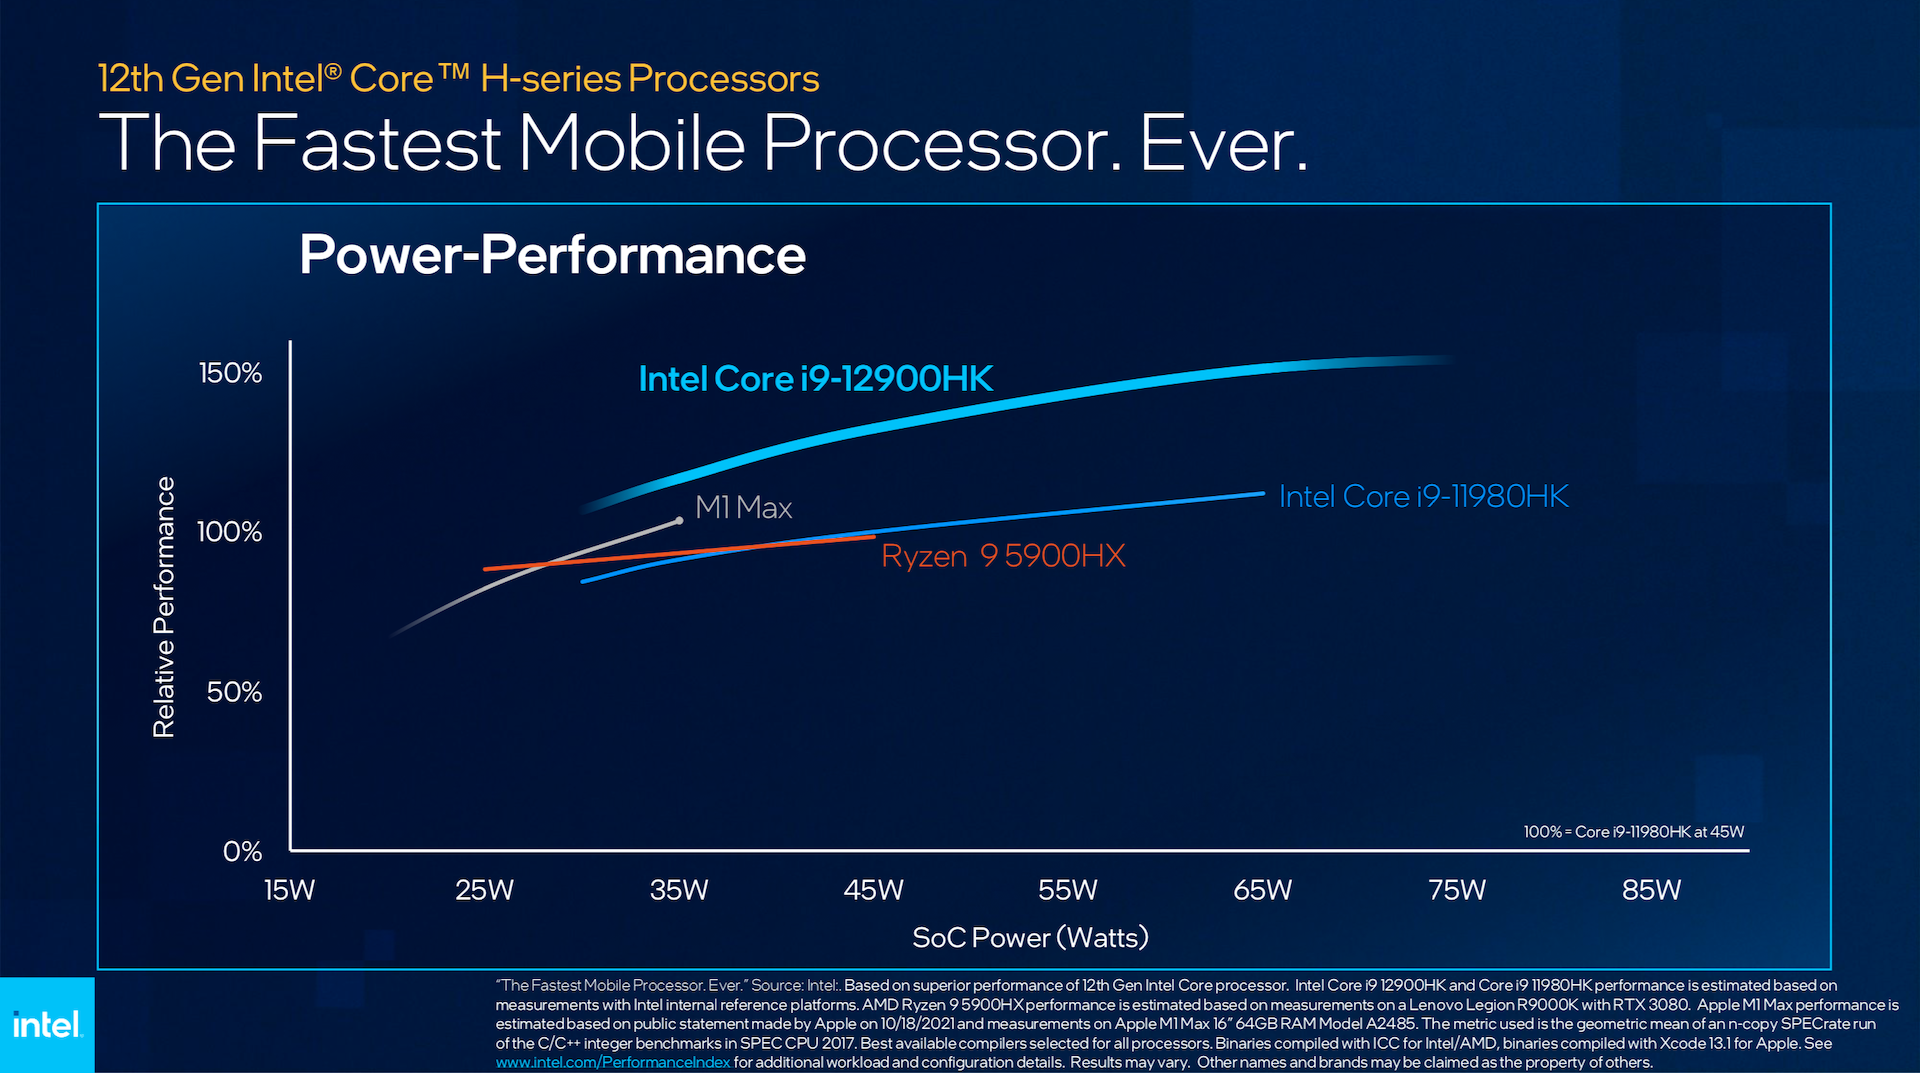 Intel comparing its Core i9 chip with Apple's M1 Max